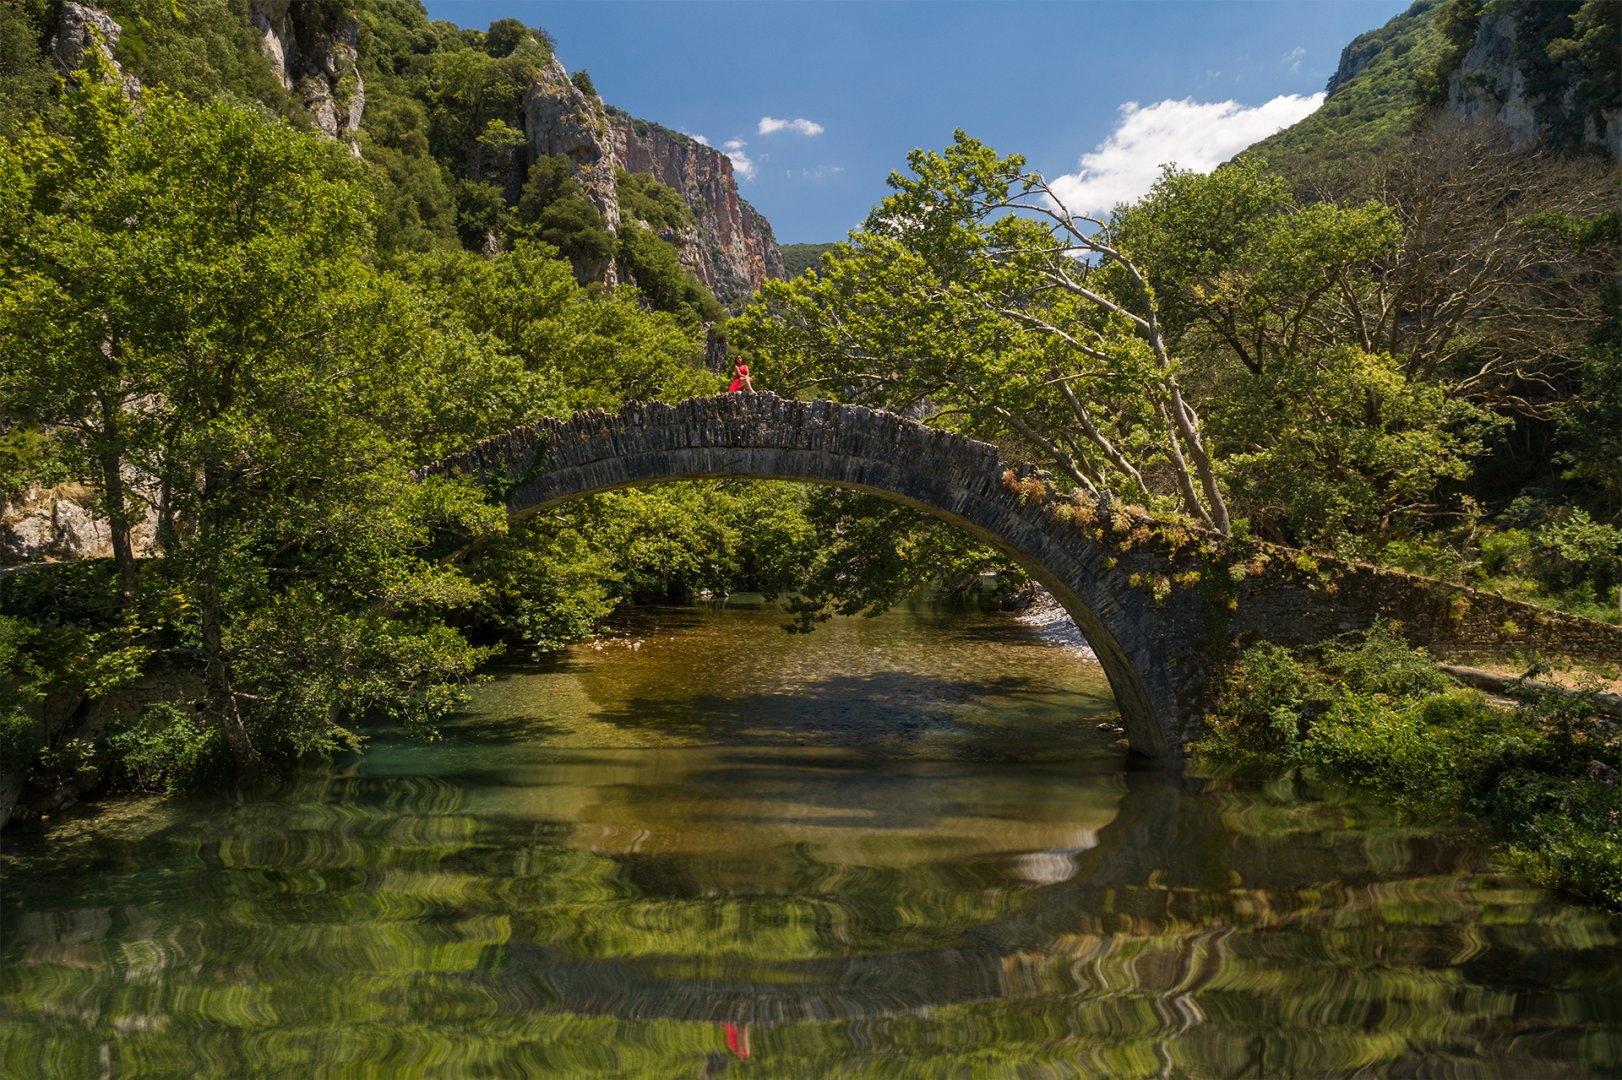 The_Bridge_of_Kleidonia_with_Reflection_Facebook_3_by_2_DJI_0182.jpg